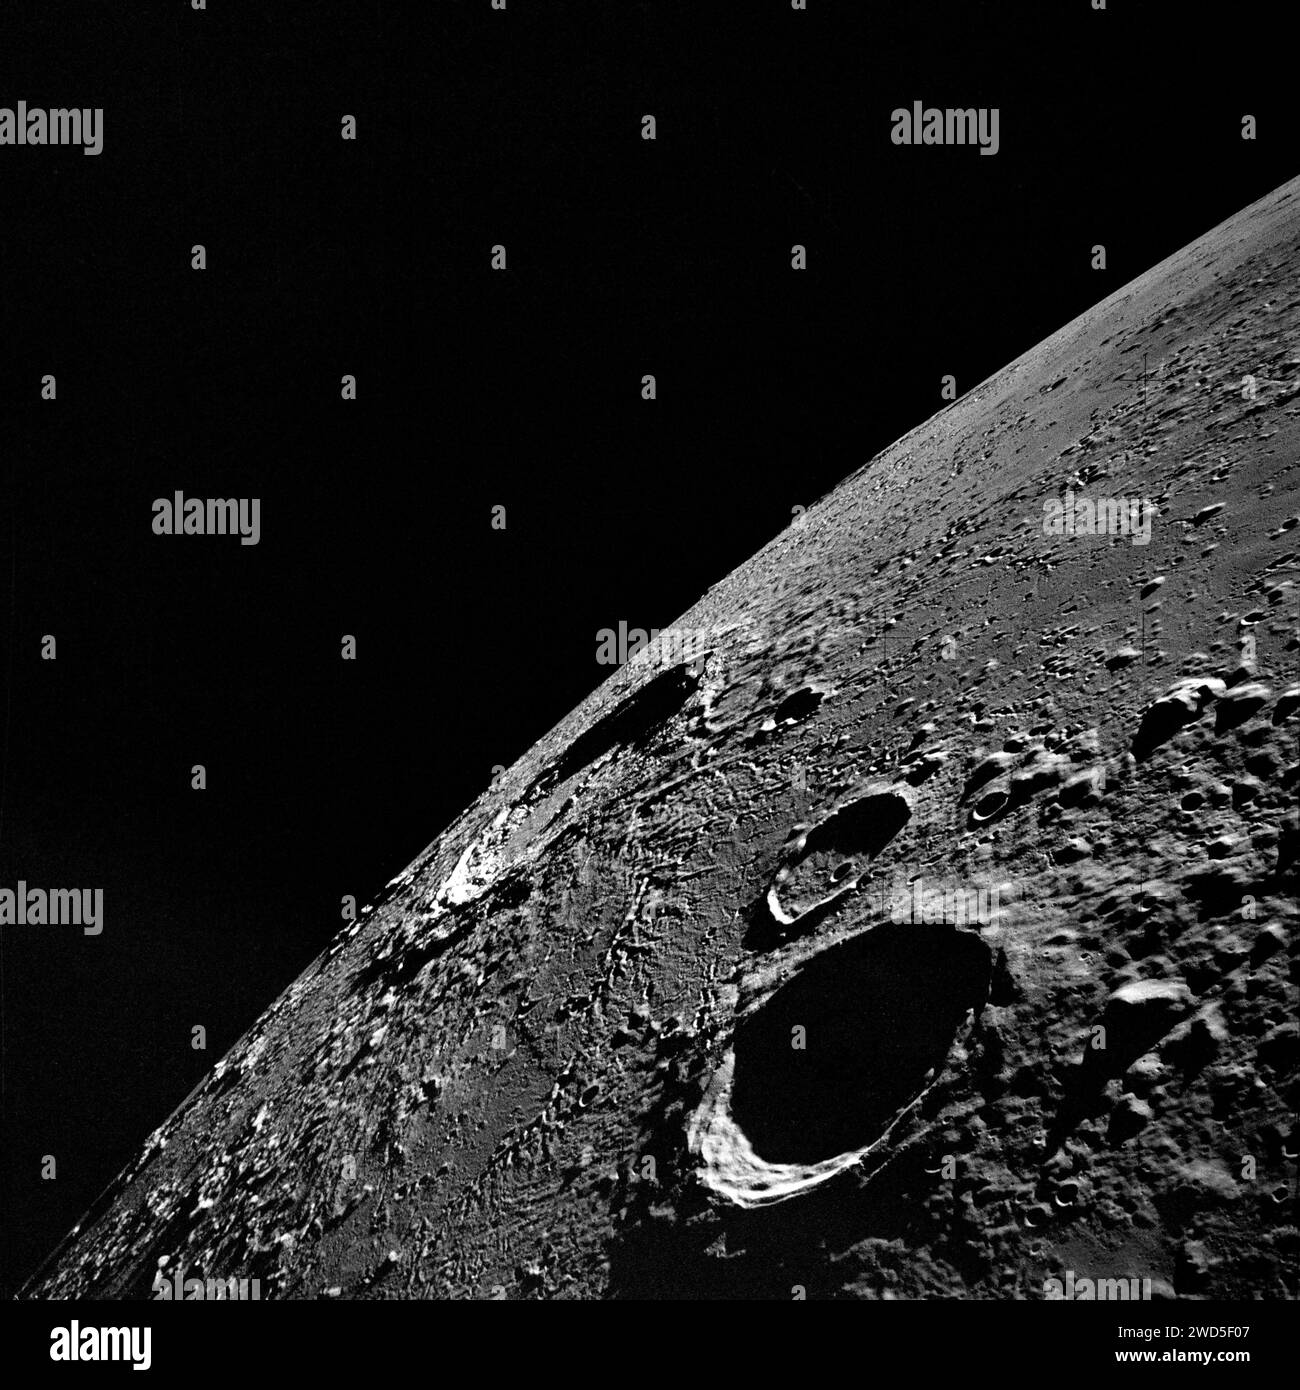 High-angle view of lunar nearside looking northeast toward crater Copernicus (in center near horizon), crater Reinhold (foreground) and the smaller crater Reinhold B (above Reinhold), as photographed from Apollo 12 spacecraft, NASA, November 19, 1969 Stock Photo